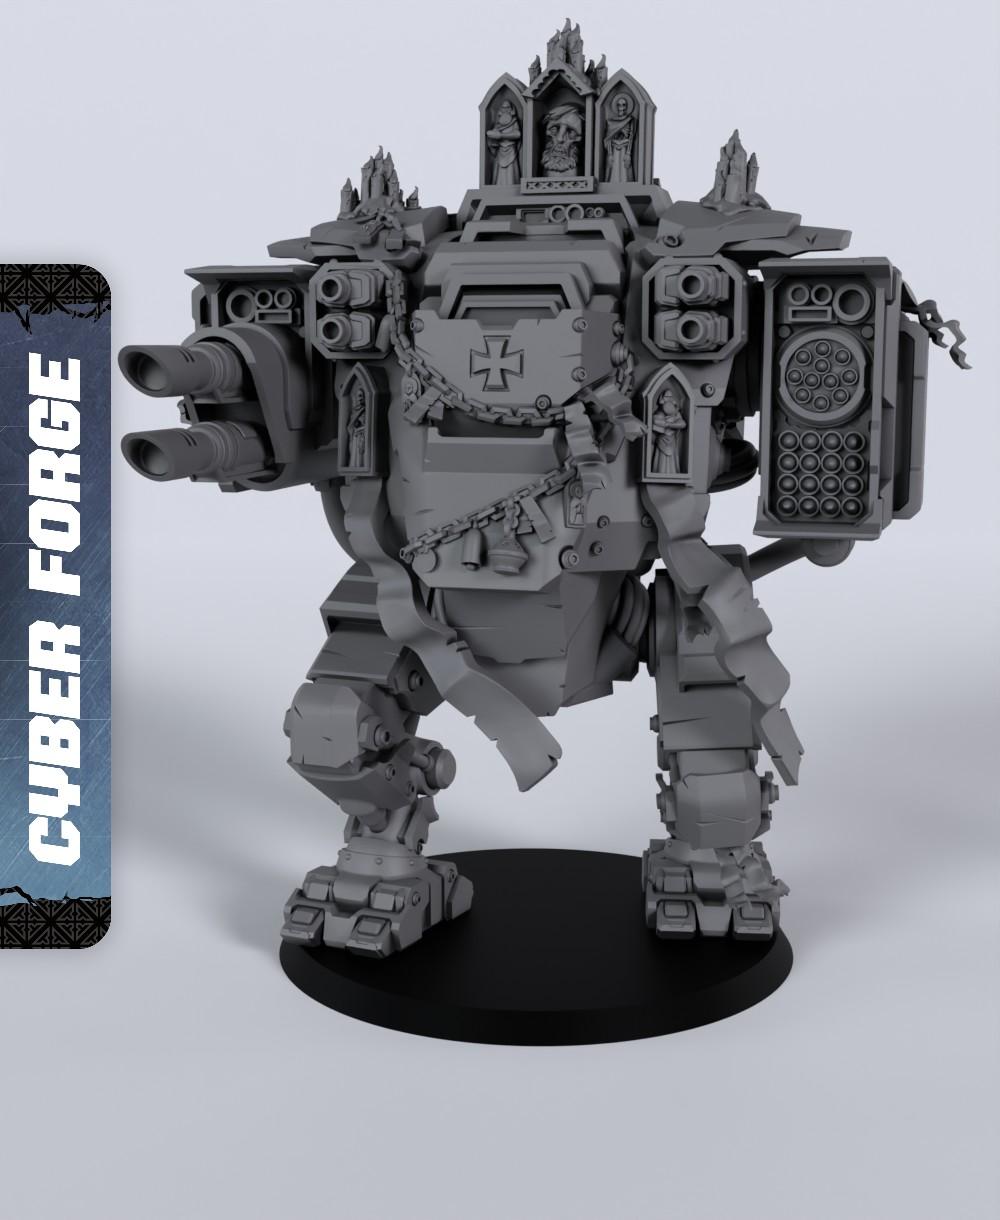 Stronghold Dreadnought - With Free Cyberpunk Warhammer - 40k Sci-Fi Gift Ideas for RPG and Wargamers 3d model